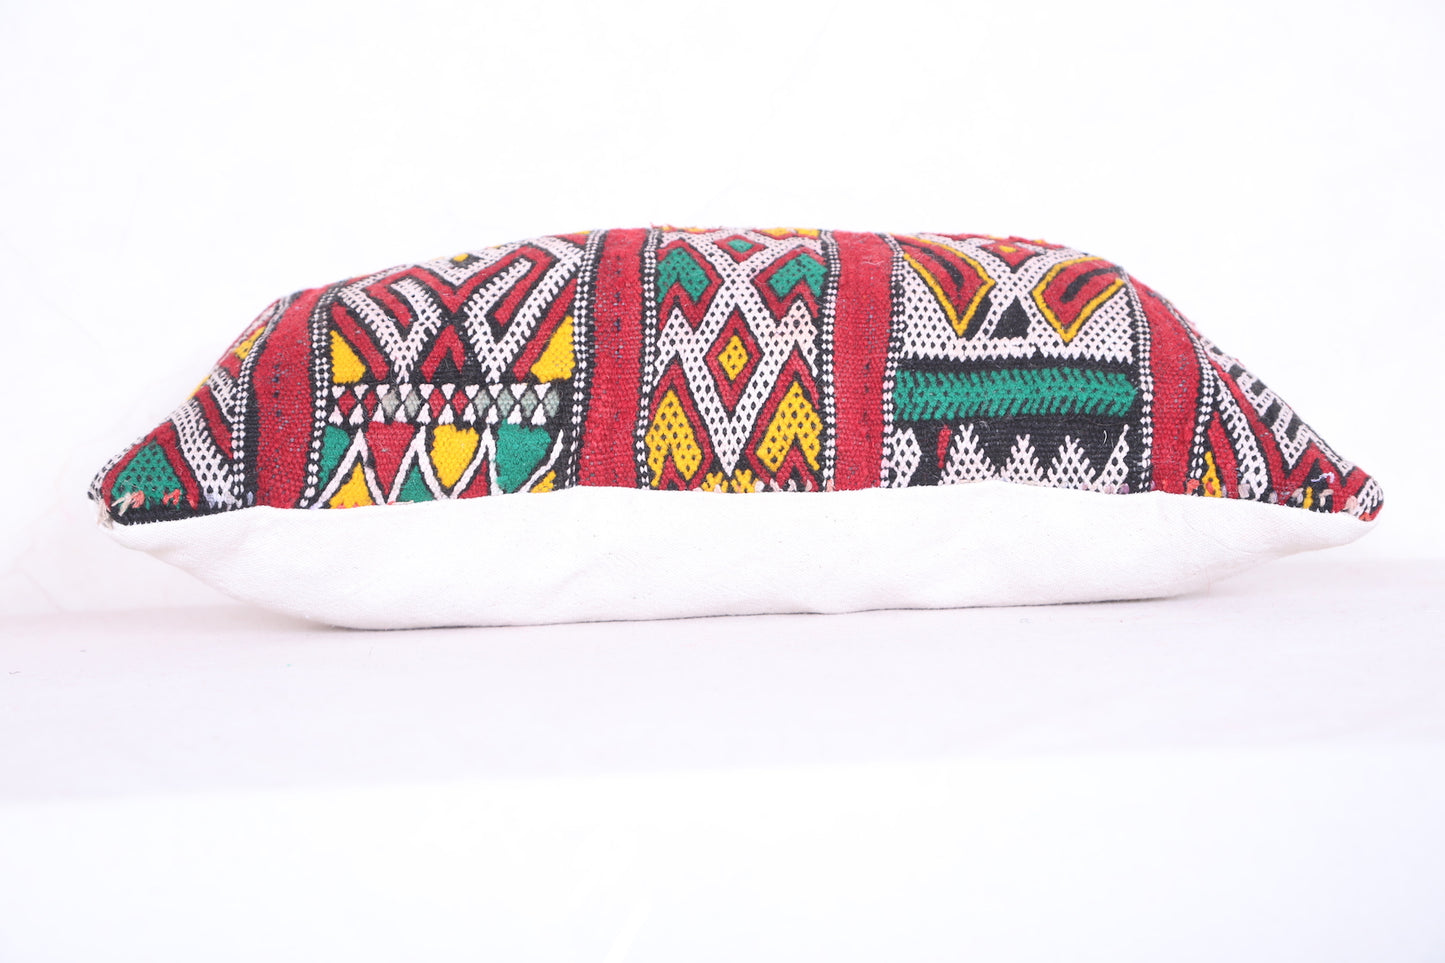 Moroccan handmade kilim pillow 11.8 INCHES X 19.2 INCHES